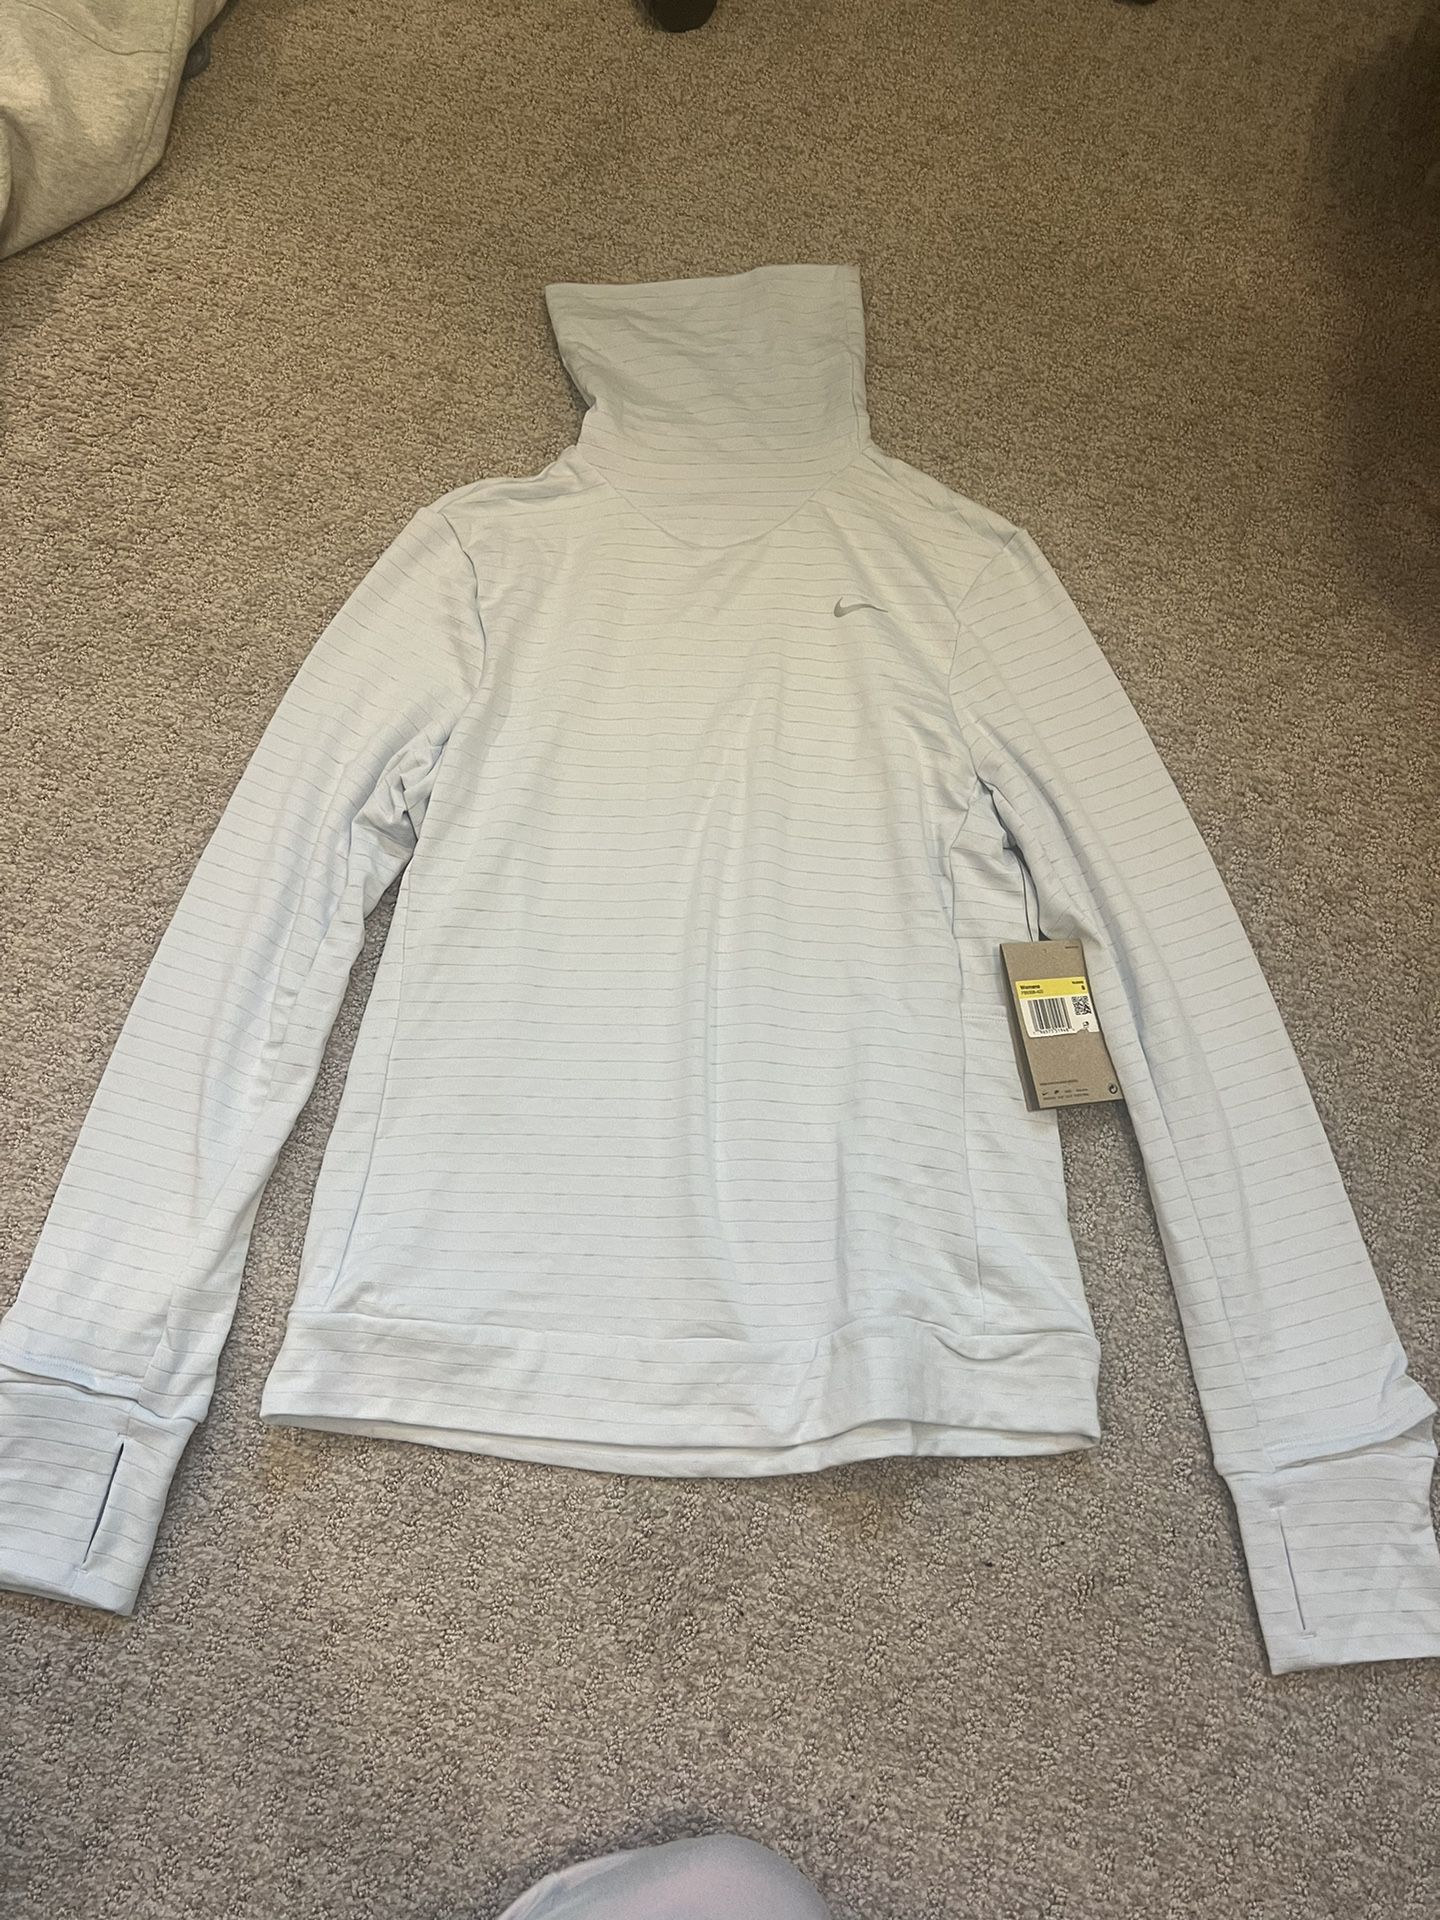 Nike Therma Fit Light Jacket Size Small